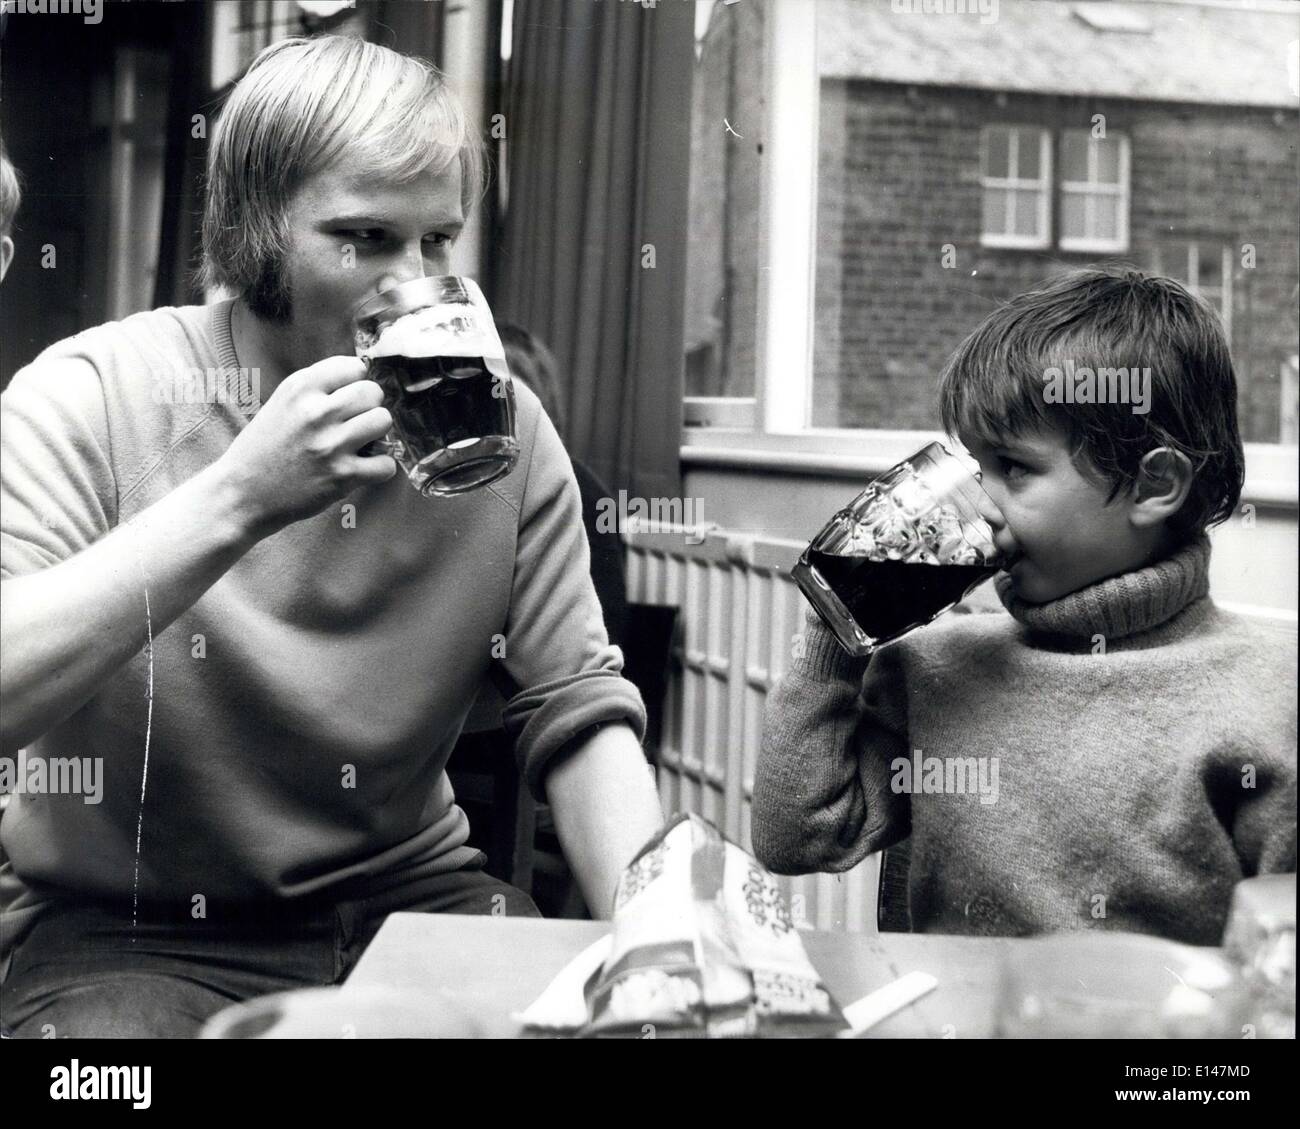 Apr. 17, 2012 - Six-year-old Andrew Born sinks a pint with Peter Fitton after training. ''Mine's Coke'' says Andrew. Stock Photo